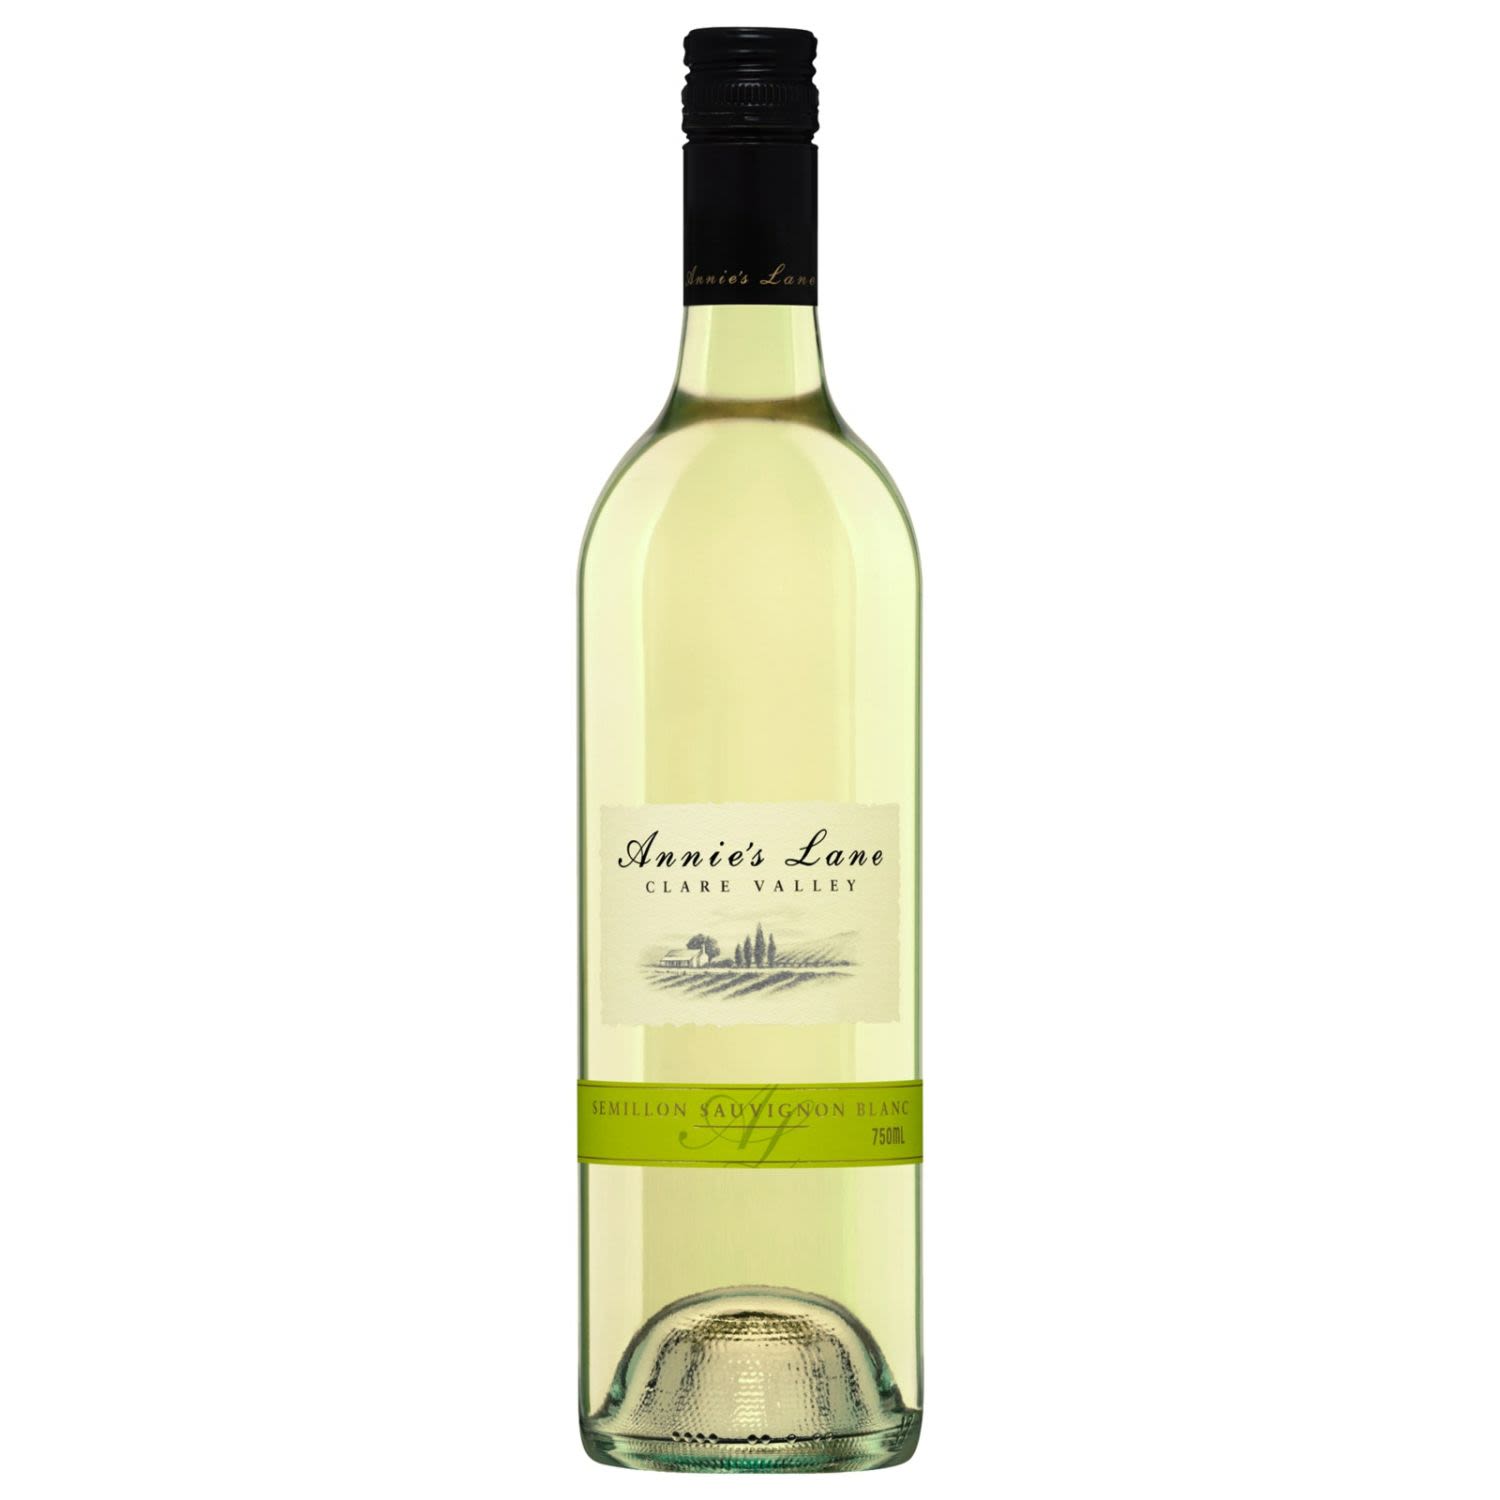 Freshly cut hay, attractive floral notes & hints of lemon & lychee excite the nose. The palate brims with green melon & tropical fruit flavours. A fine delicate wine that is drinking perfectly now.<br /> <br />Alcohol Volume: 12.50%<br /><br />Pack Format: Bottle<br /><br />Standard Drinks: 7.4</br /><br />Pack Type: Bottle<br /><br />Country of Origin: Australia<br /><br />Region: Clare Valley<br /><br />Vintage: Vintages Vary<br />